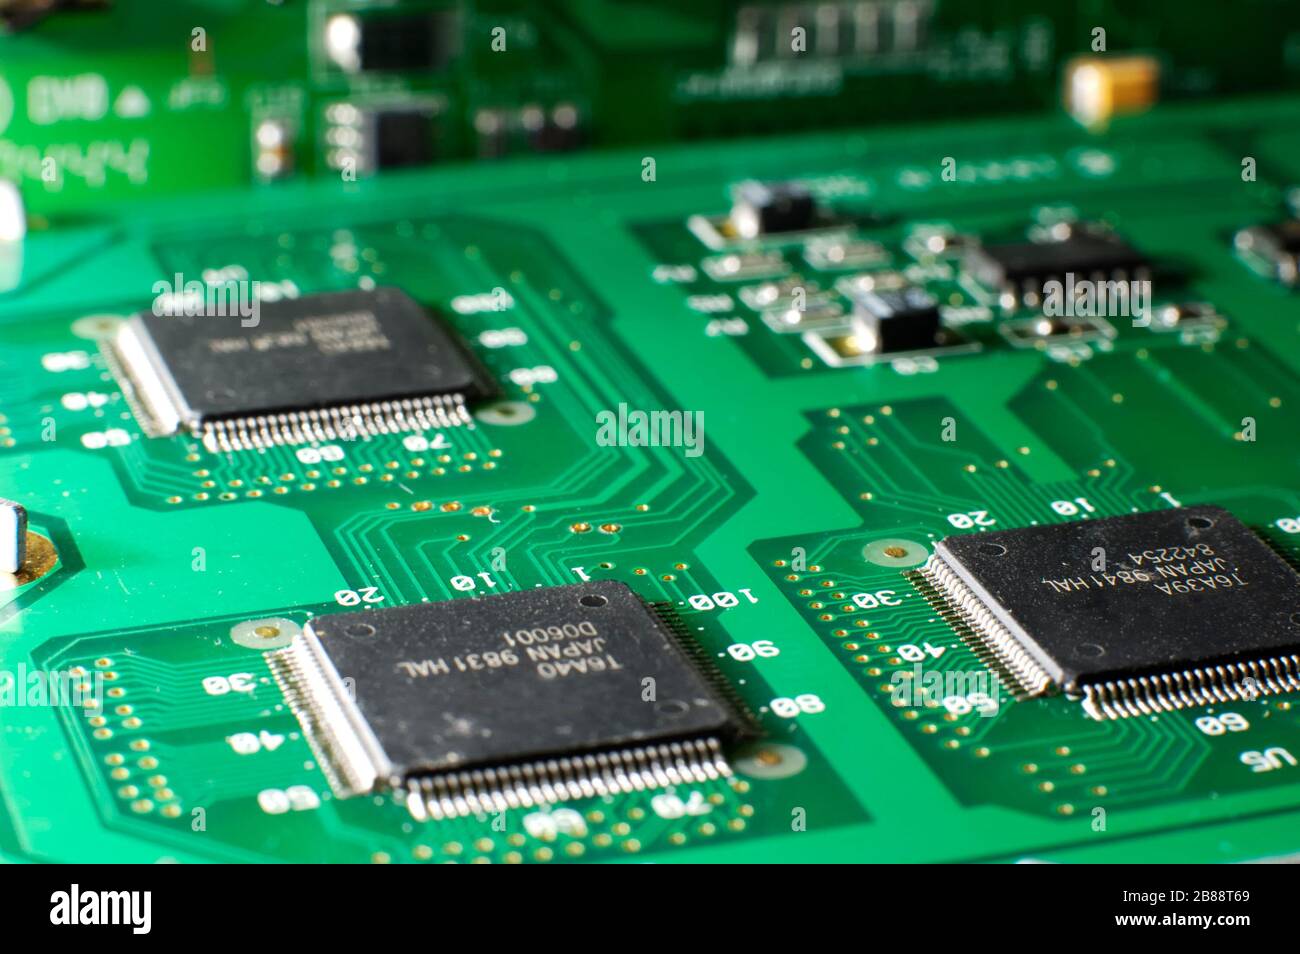 Close up green memory board with SMD chip lies on the table. Computer parts  concept. Electronic Parts and Component Stock Photo - Alamy